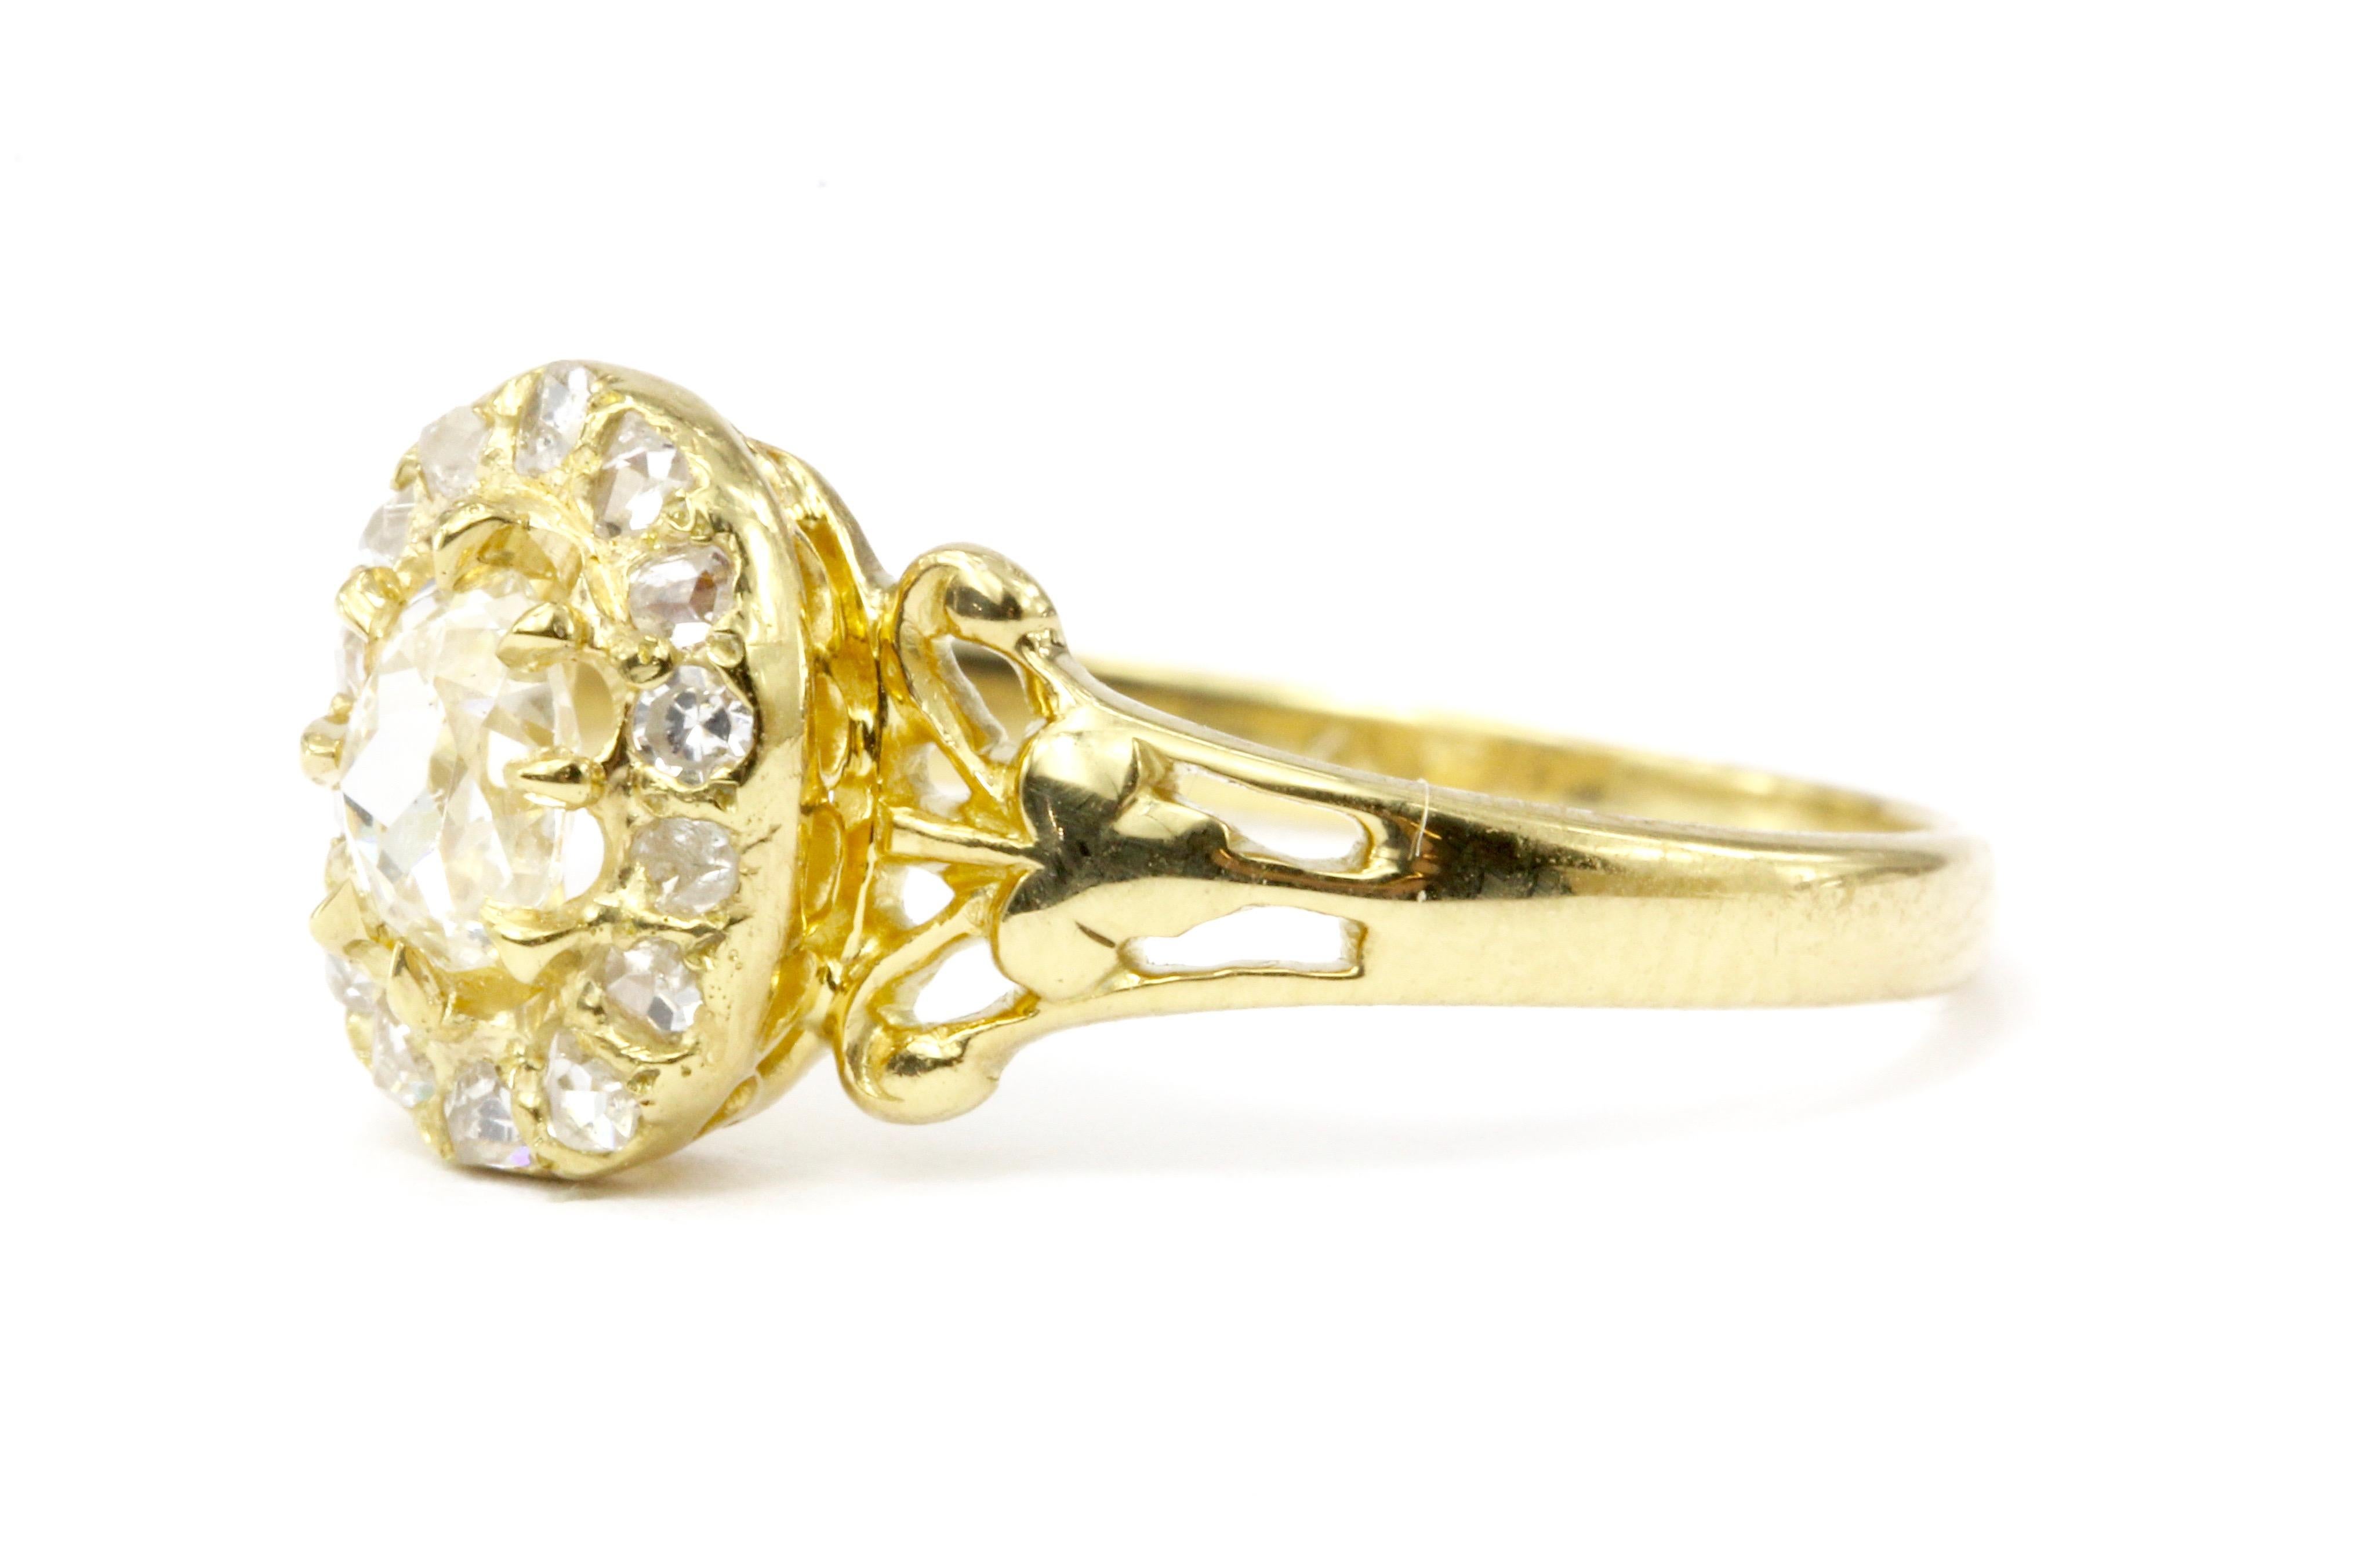 Era: Victorian c. 1890's

Composition: 18K Yellow Gold

Primary Stone: Diamond

Stone Carat:  Approximately .25 carats

Color / Clarity: J / VS2

Shape: Antique Oval Cut

Accent Stone: Rose Cut Diamonds

Total Diamond Weight: Approximately .14